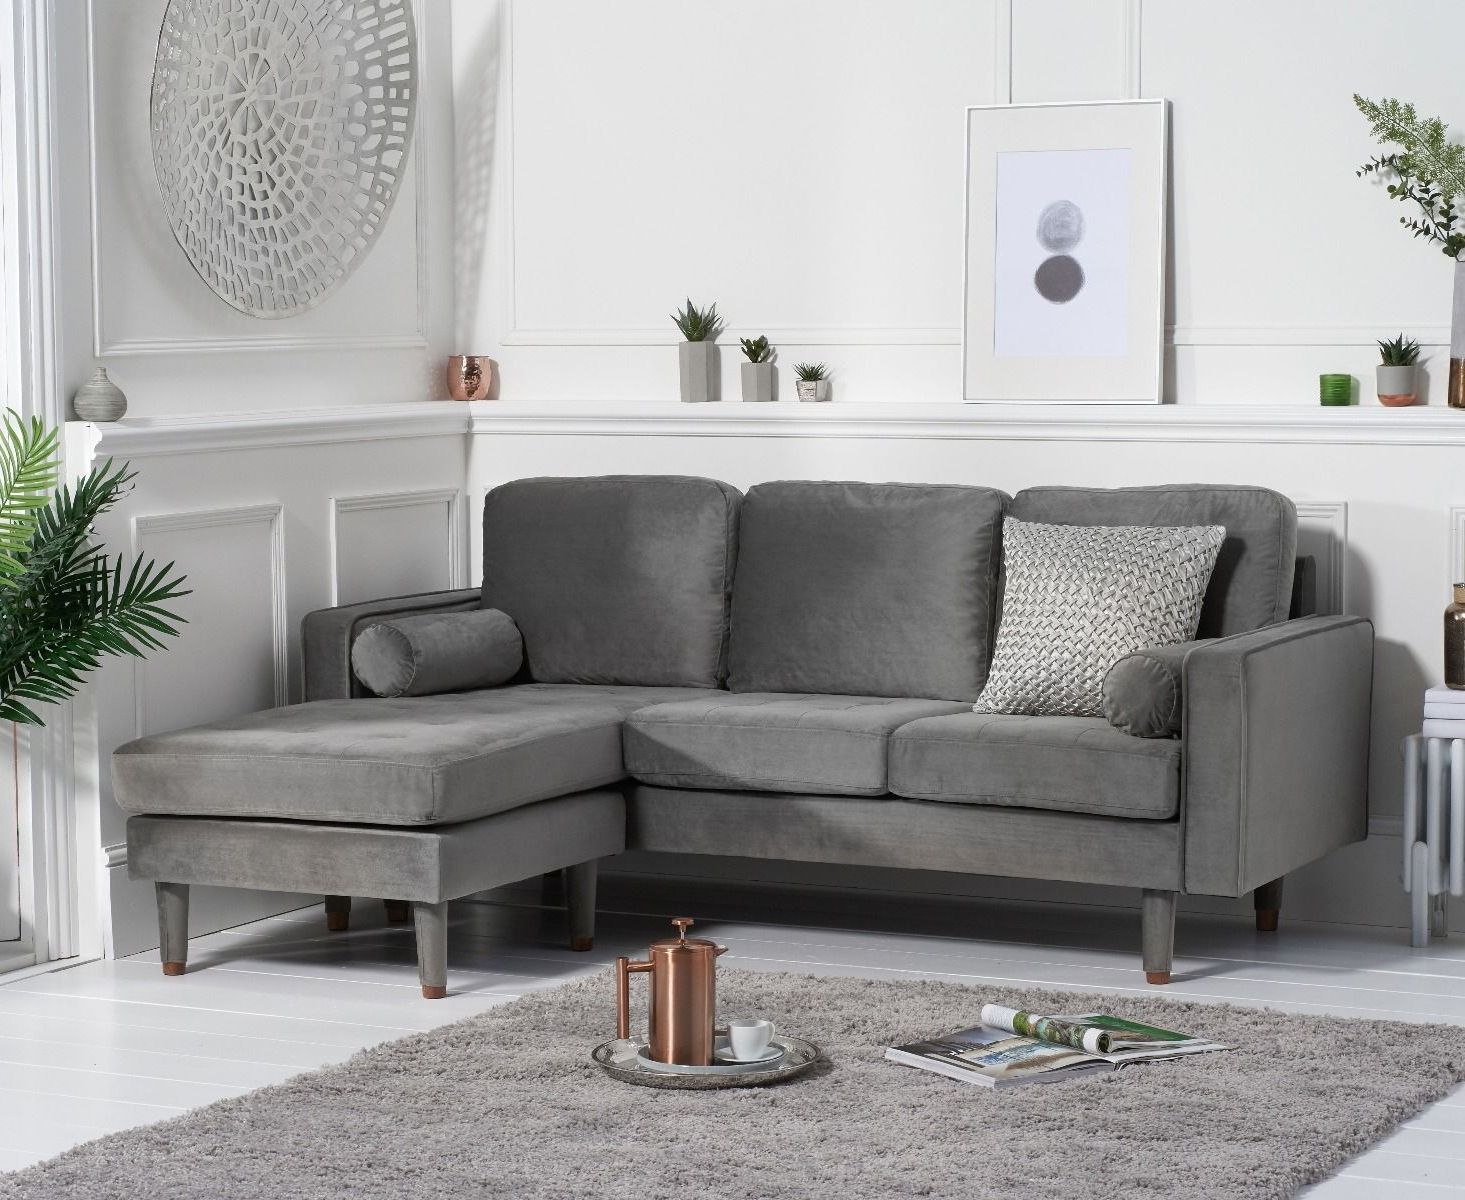 Modern Velvet Sofa Recliners With Storage Regarding Fashionable Velvet Sofa Bed With Storage – Draw Heat (View 4 of 15)